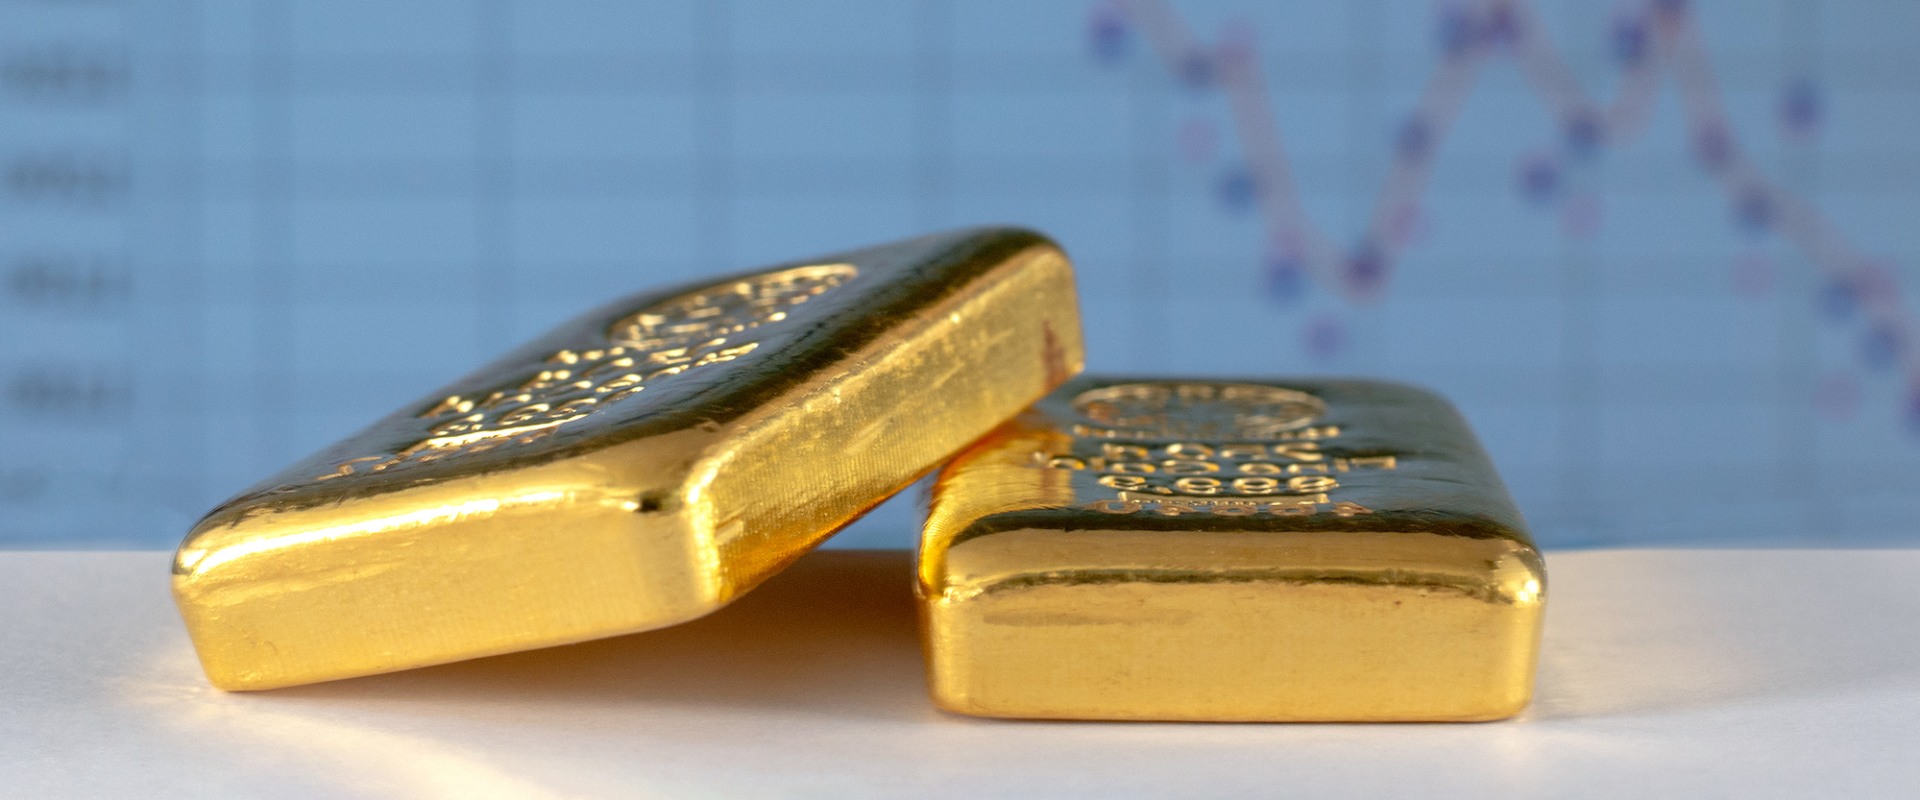 Is gold considered low-risk investment?